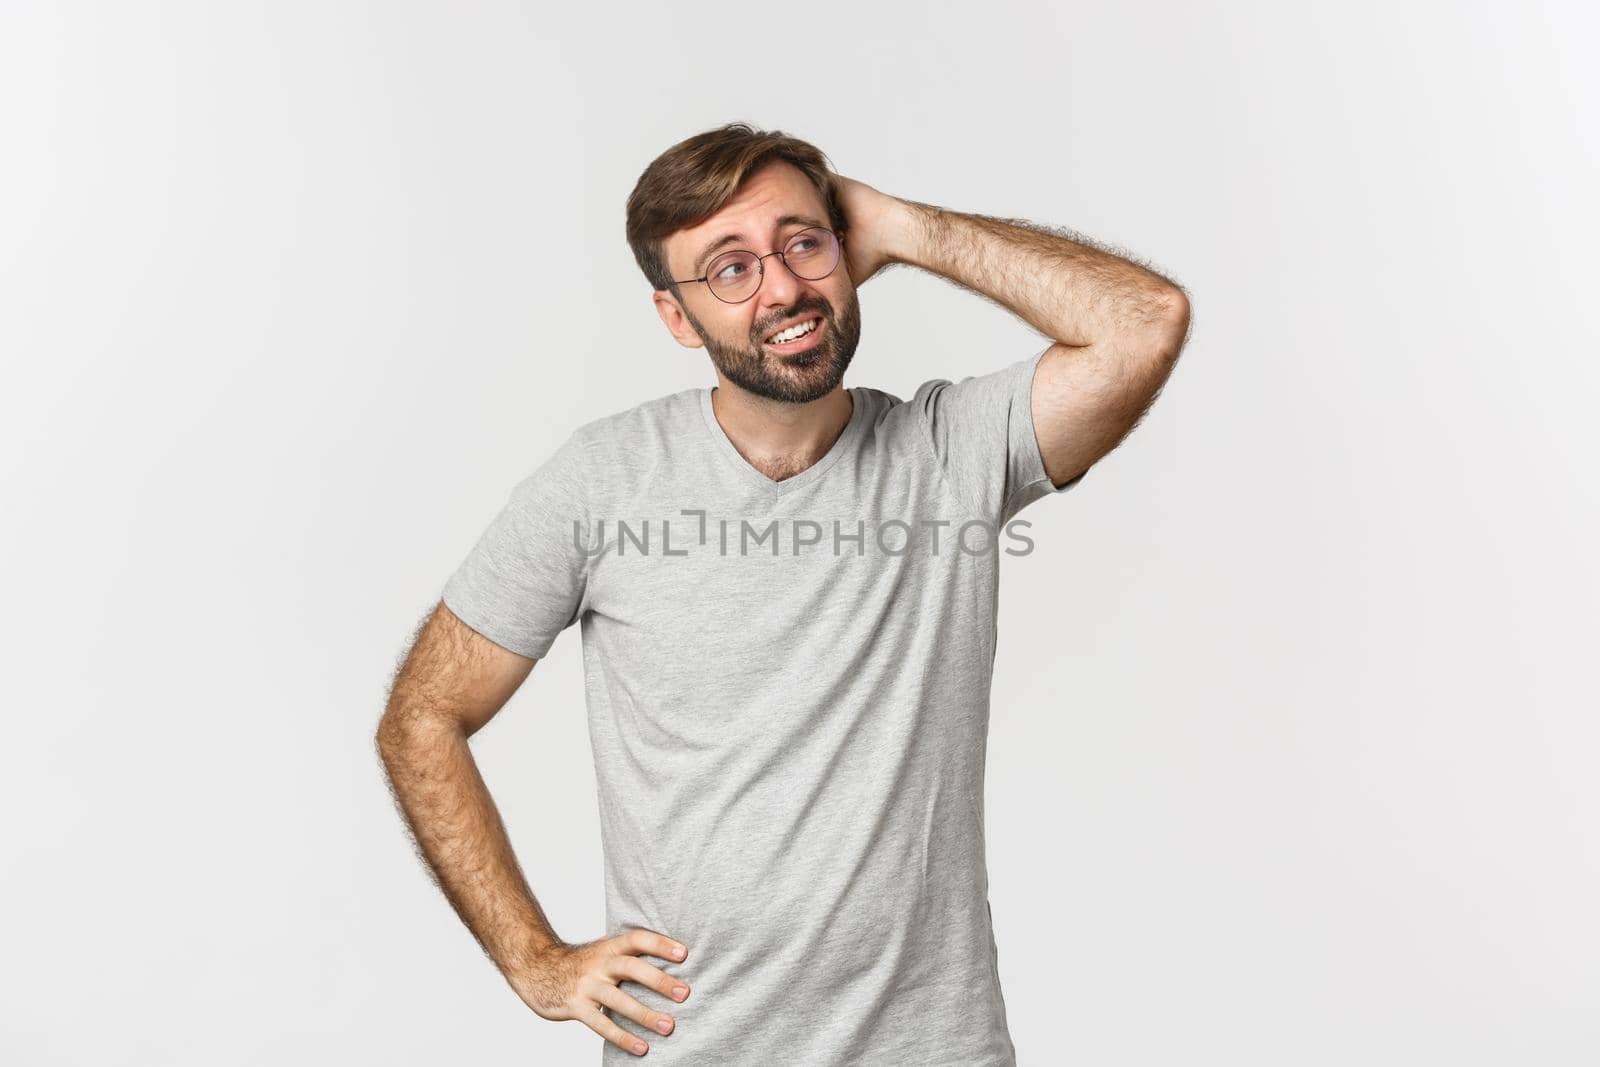 Portrait of indecisive adult man thinking, scratching head and looking confused at upper right corner, standing in gray t-shirt and glasses over white background.